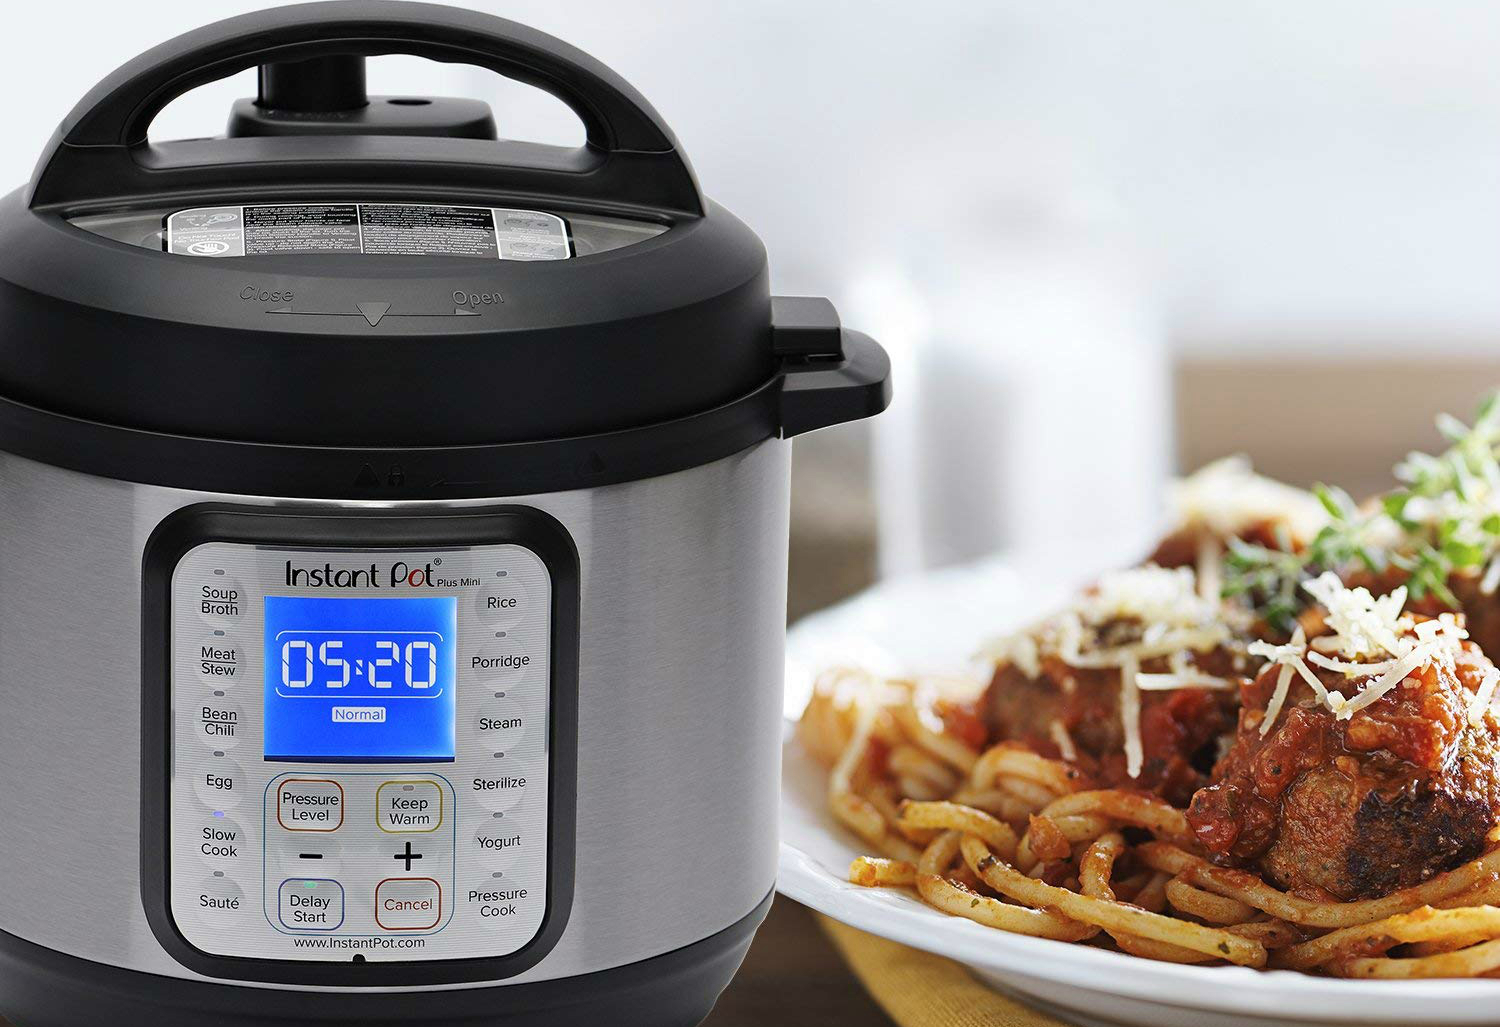 What is the purpose of the condensation collector in Instant Pot Duo Plus  9-in-1 Electric Pressure Cooker?